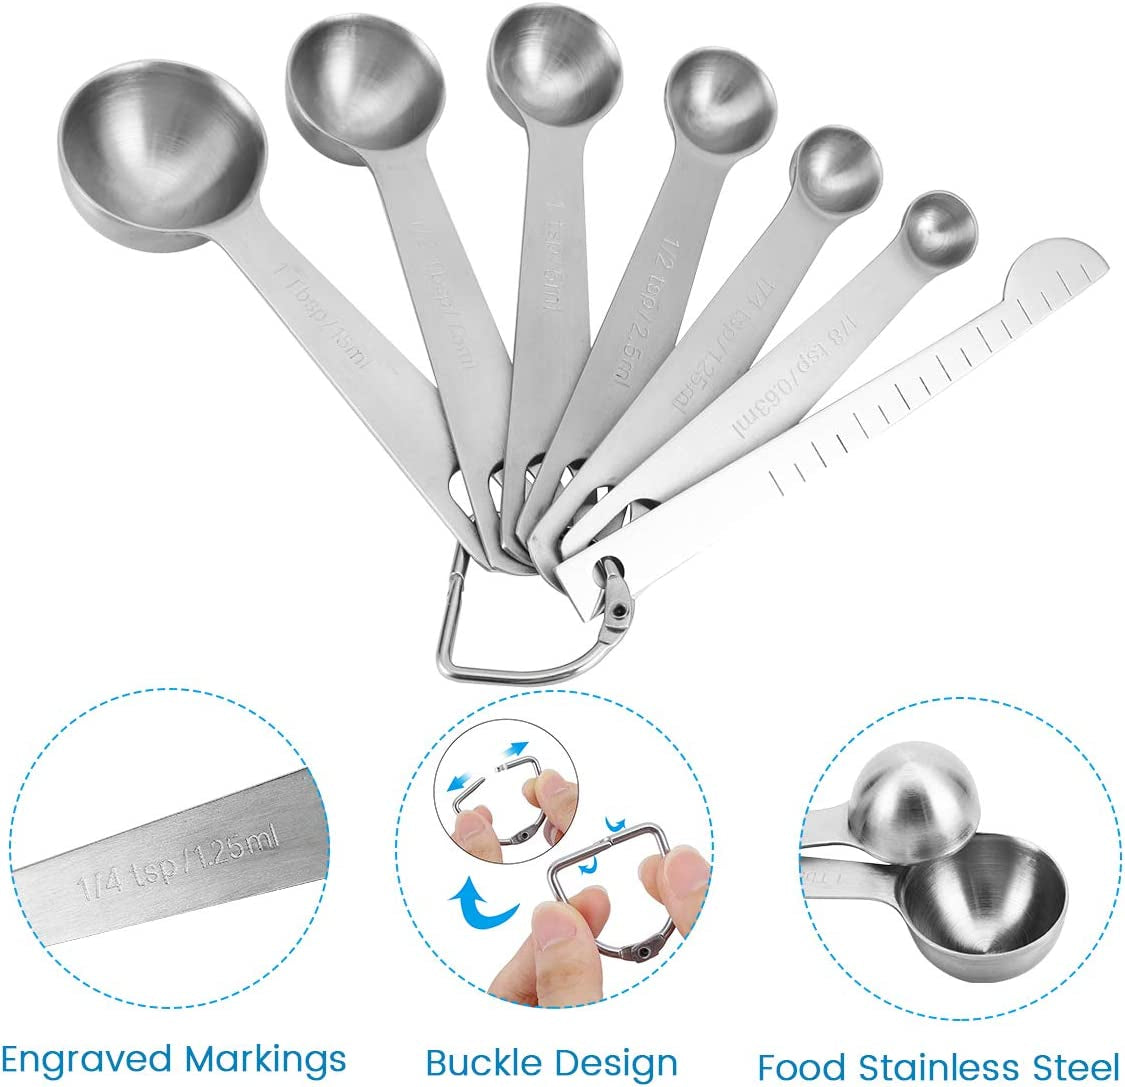 Measuring Cups and Spoons Set, 13 Pieces Premium Stainless Steel Measuring Spoons with Ruler Scoop/Clip for Baking, Liquid and Solid